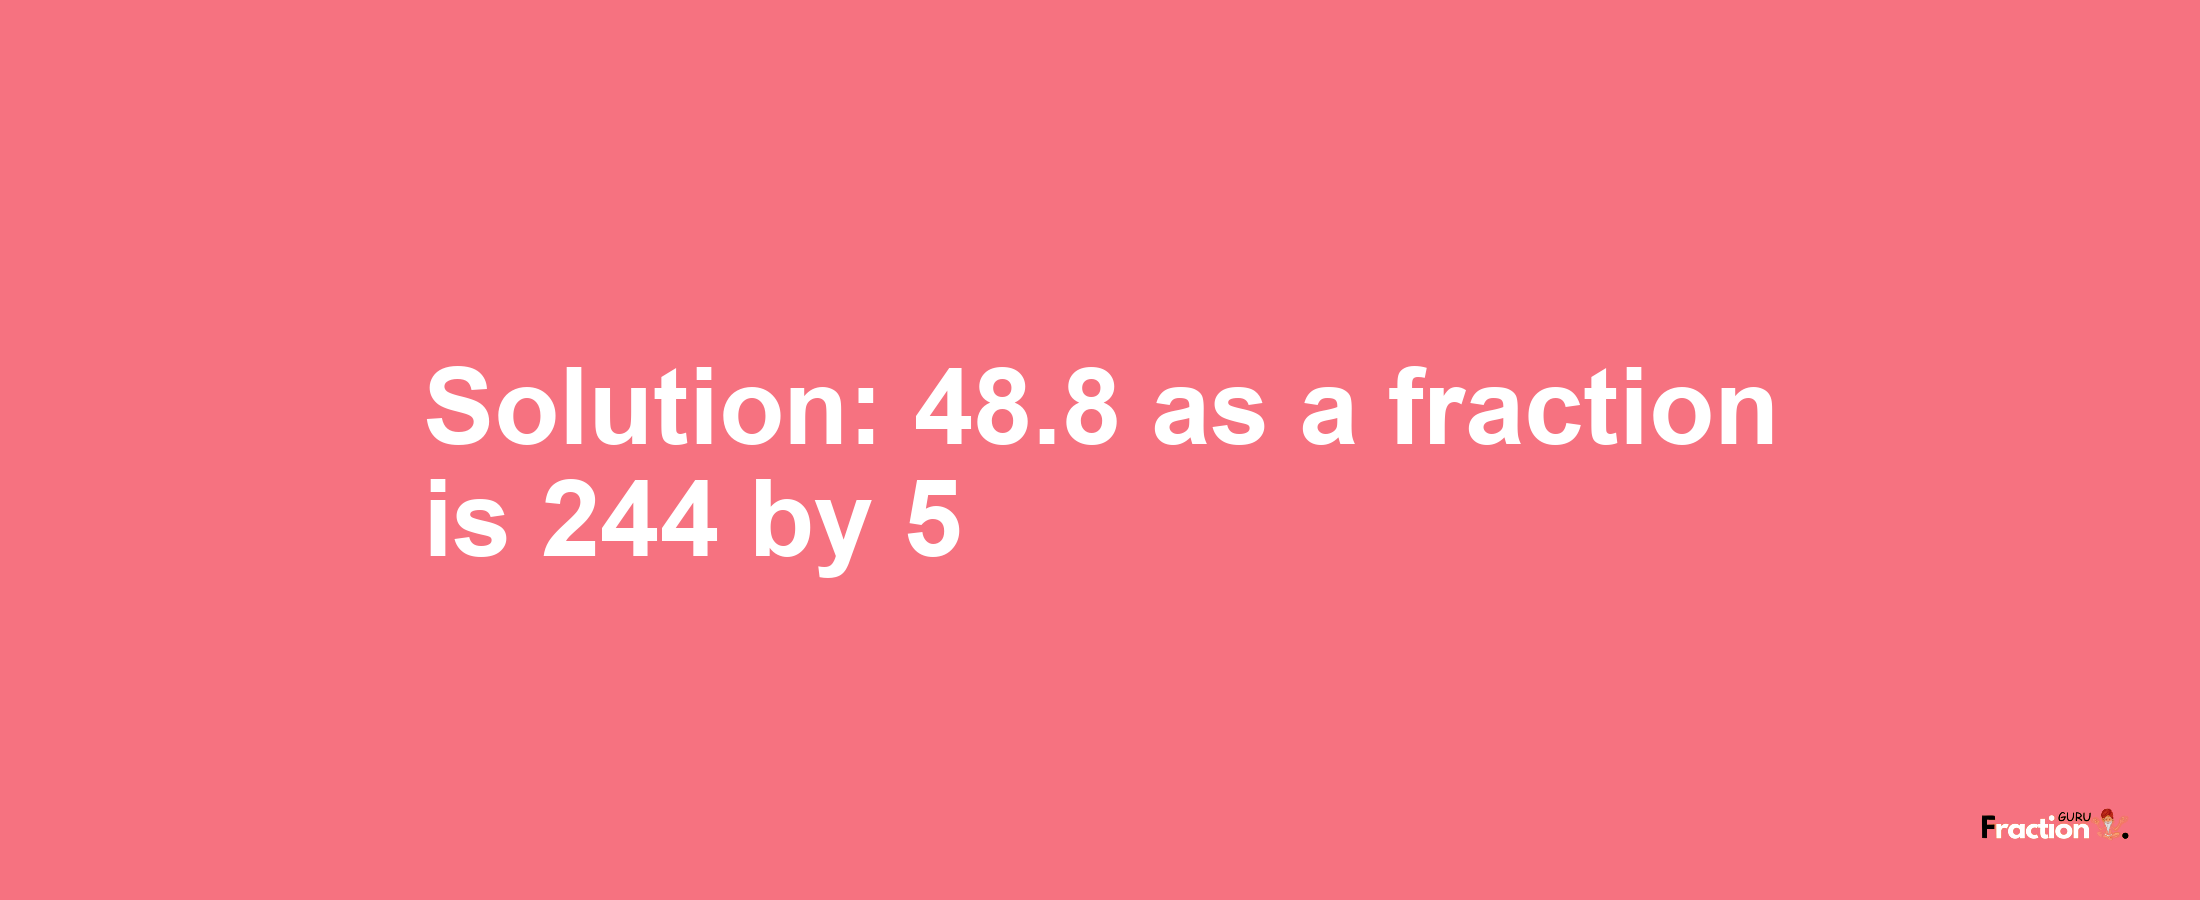 Solution:48.8 as a fraction is 244/5